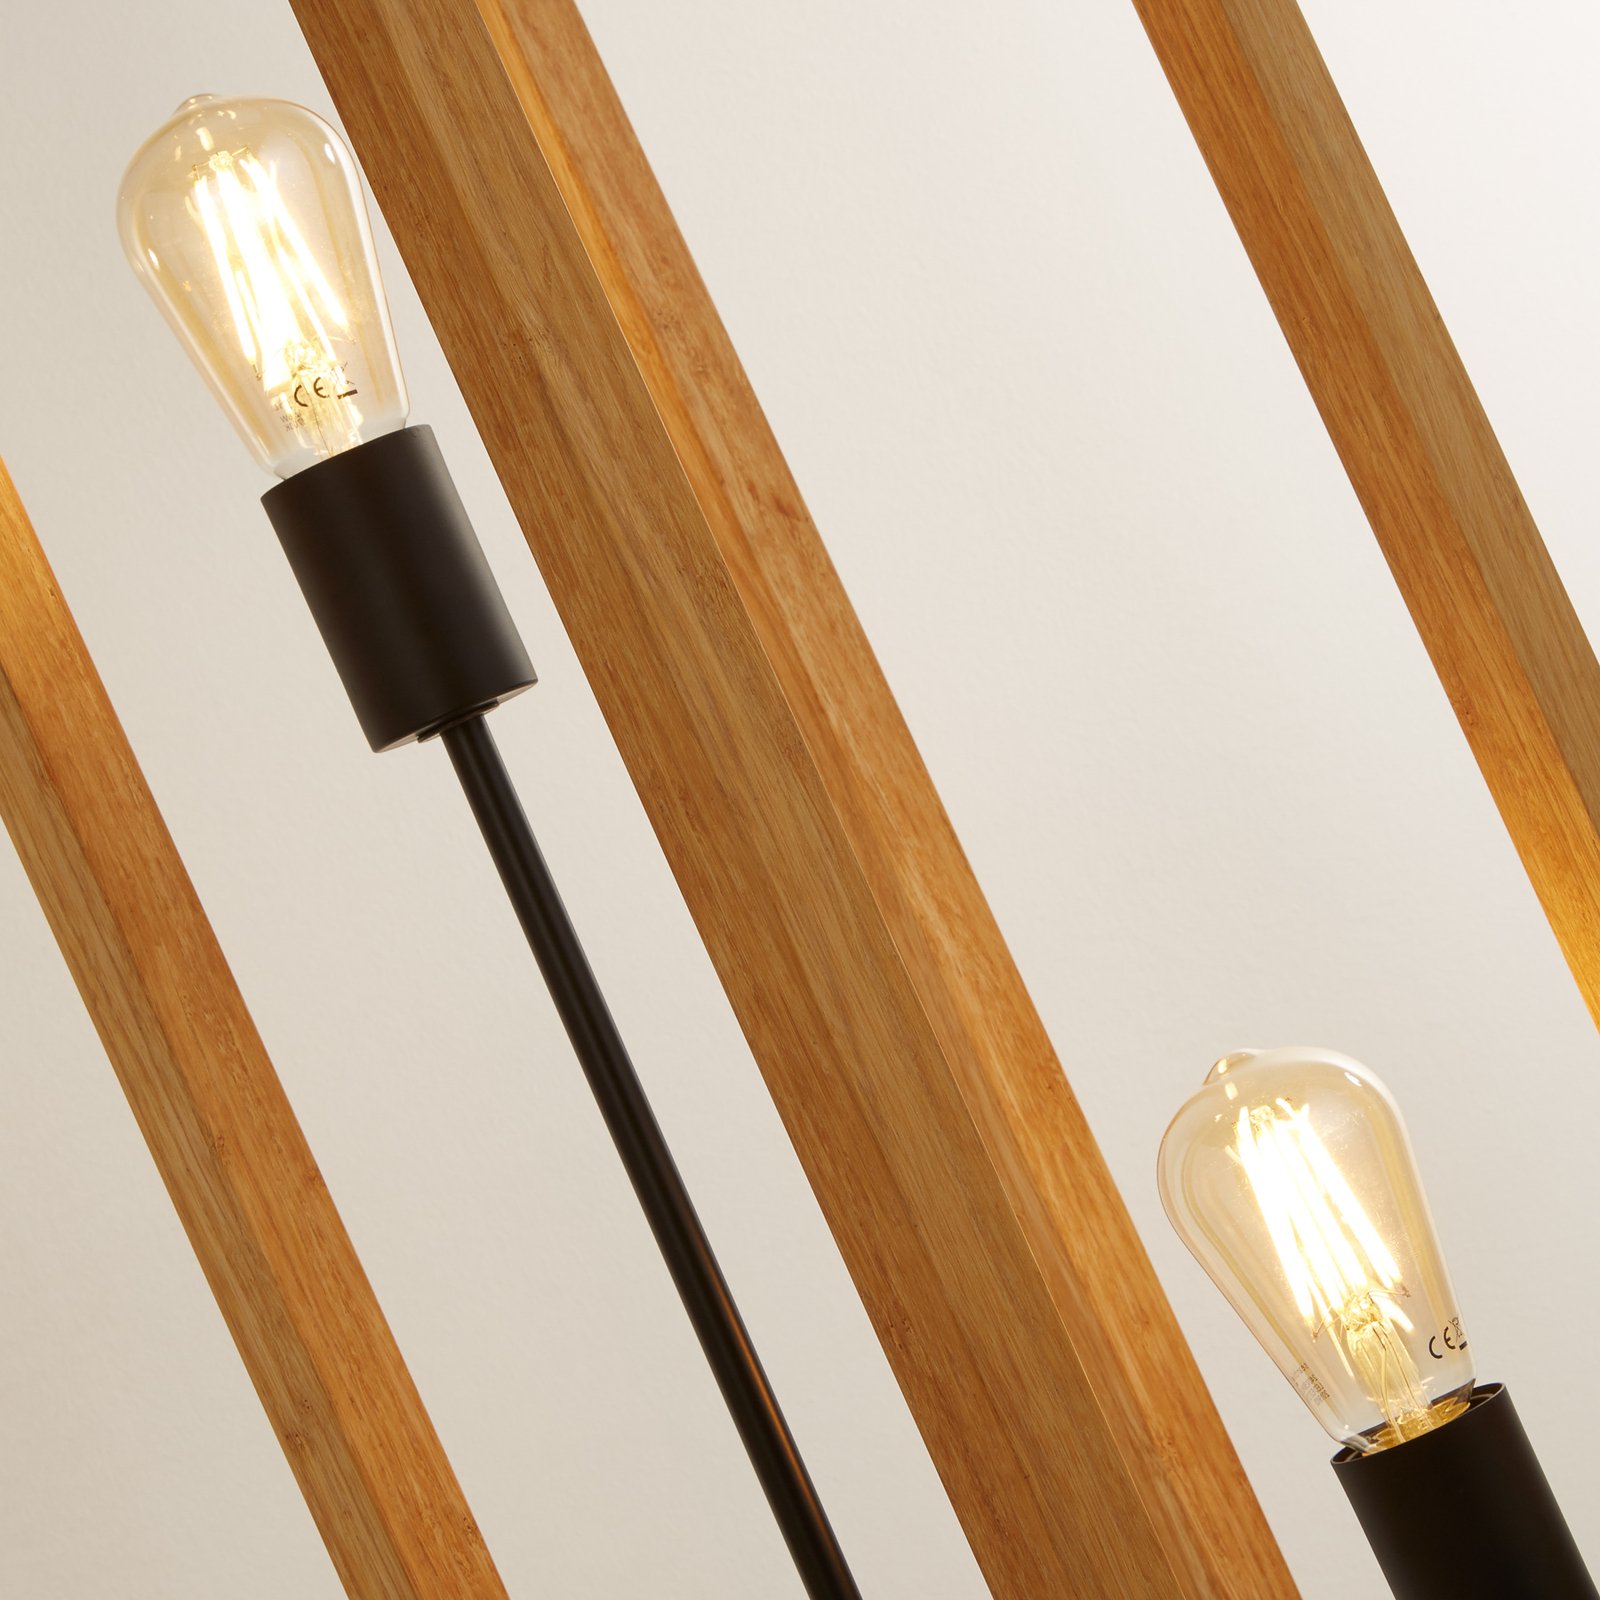 Square floor lamp made of bamboo